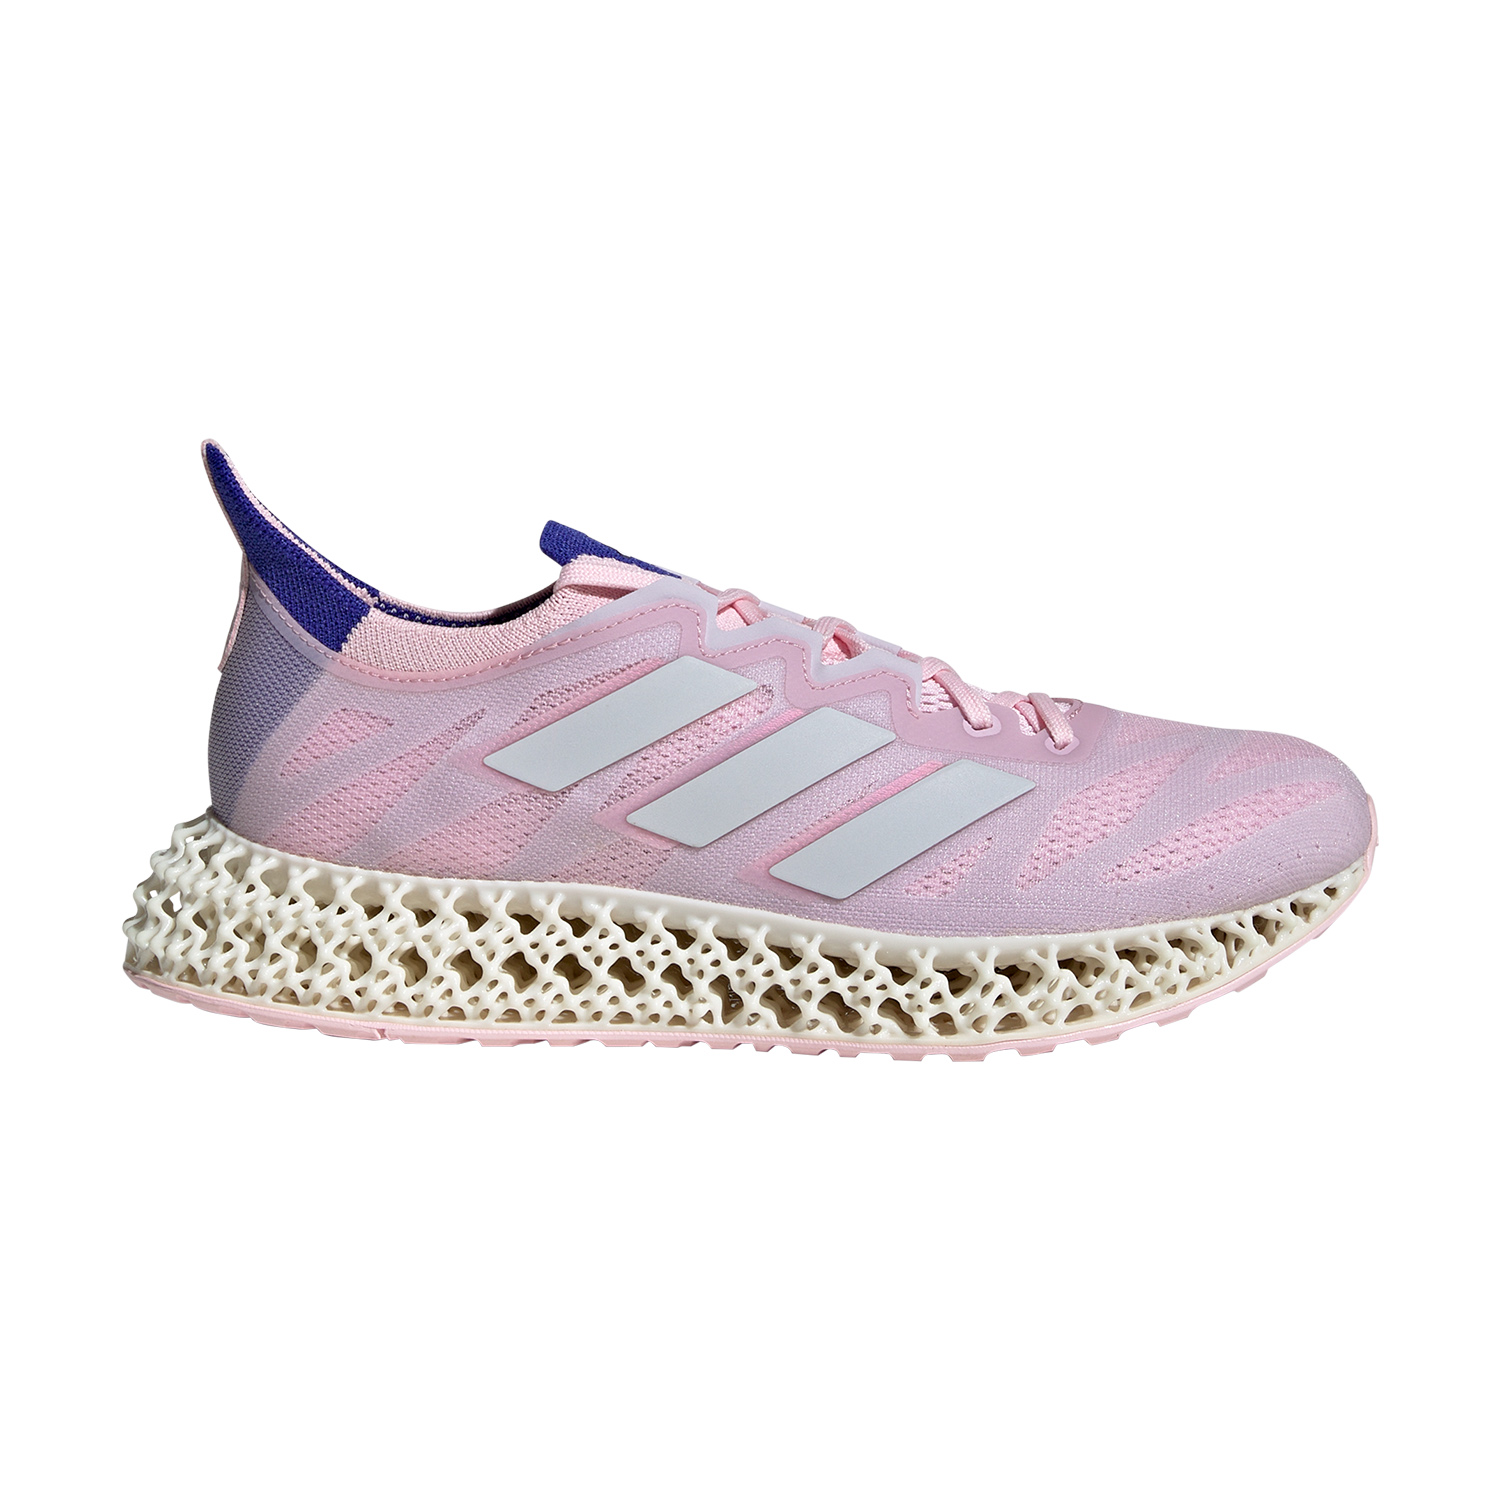 adidas 4DFWD 3 - Clear Pink/Cloud White/Lucid Blue